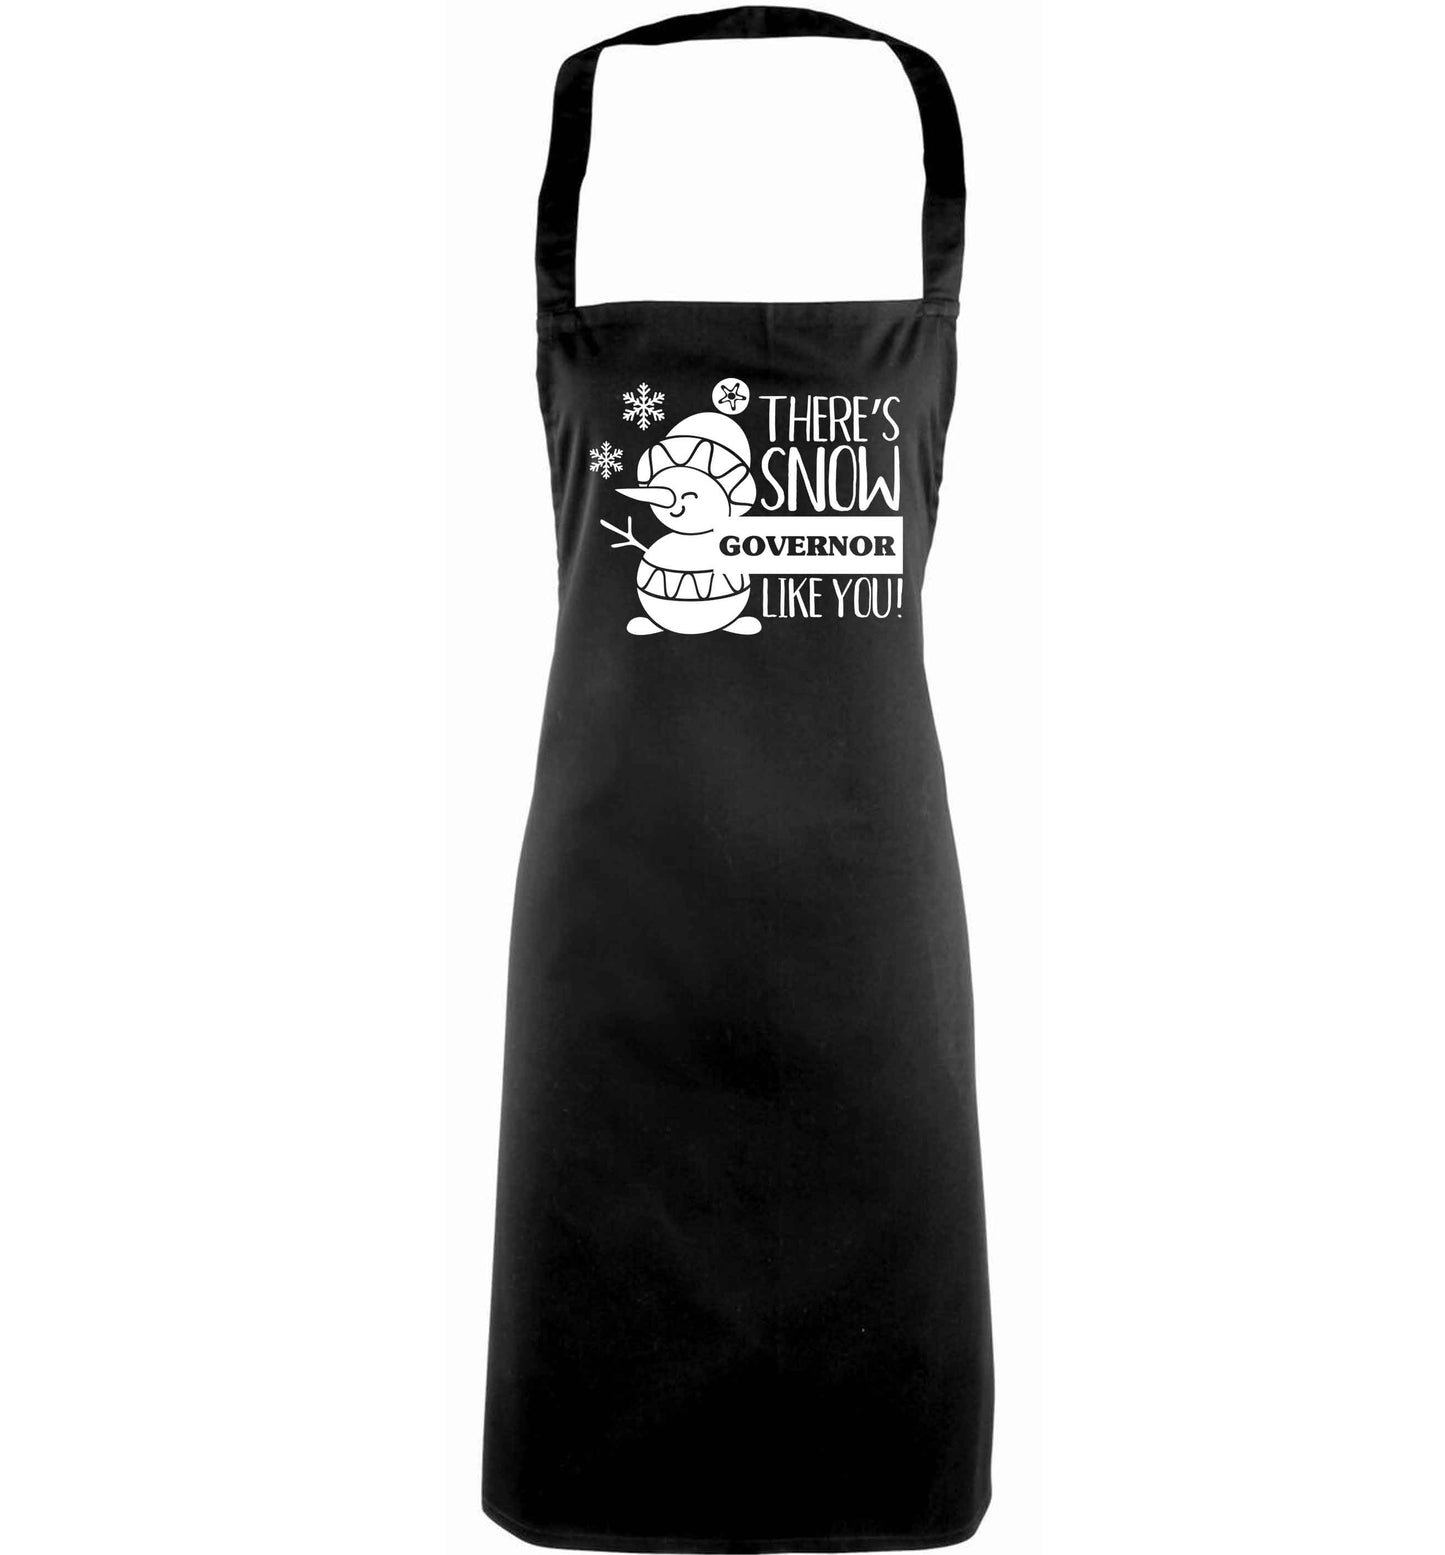 There's snow governor like you adults black apron